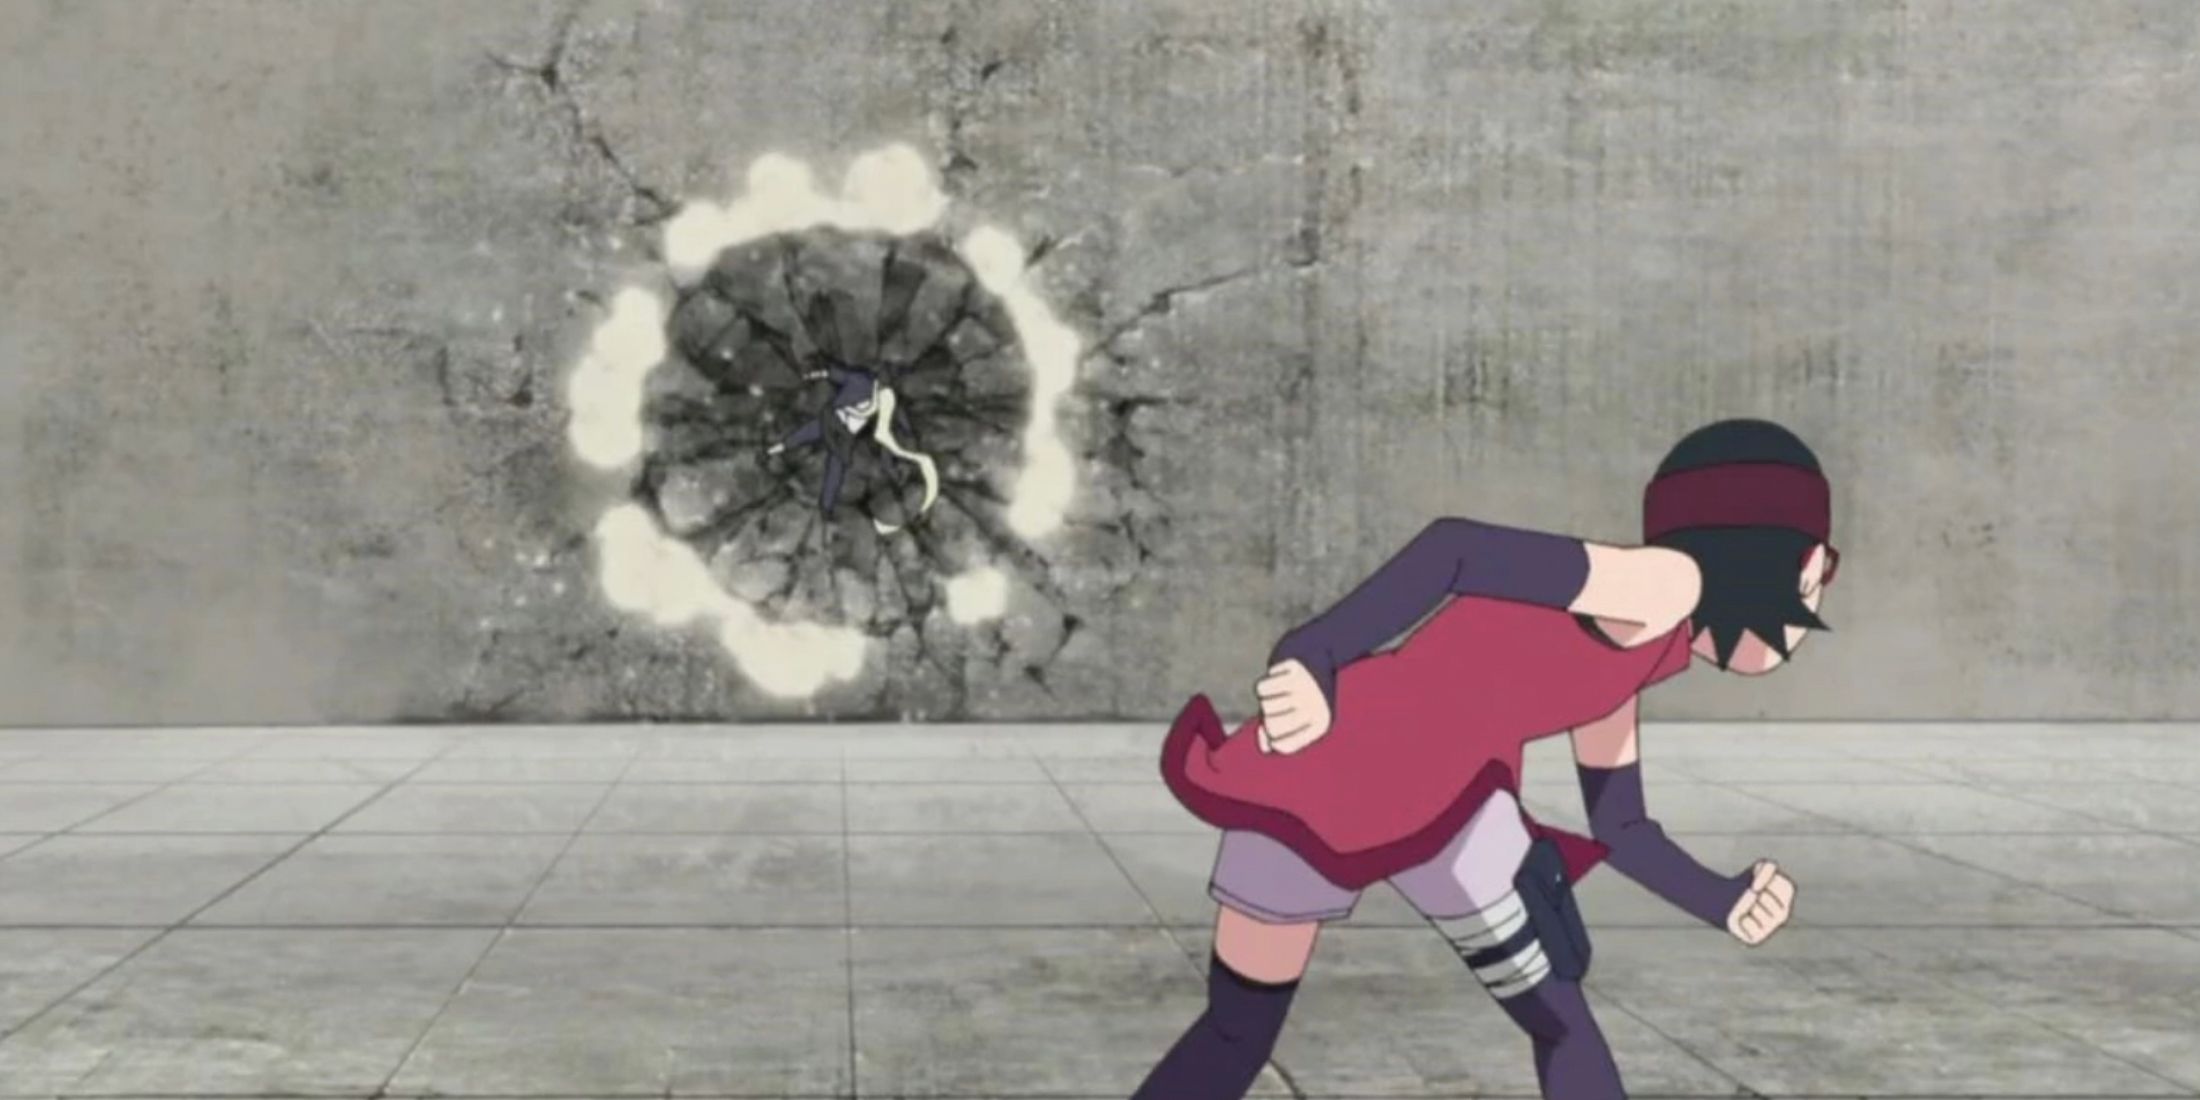 Sarada punches an opponent into a wall in Boruto